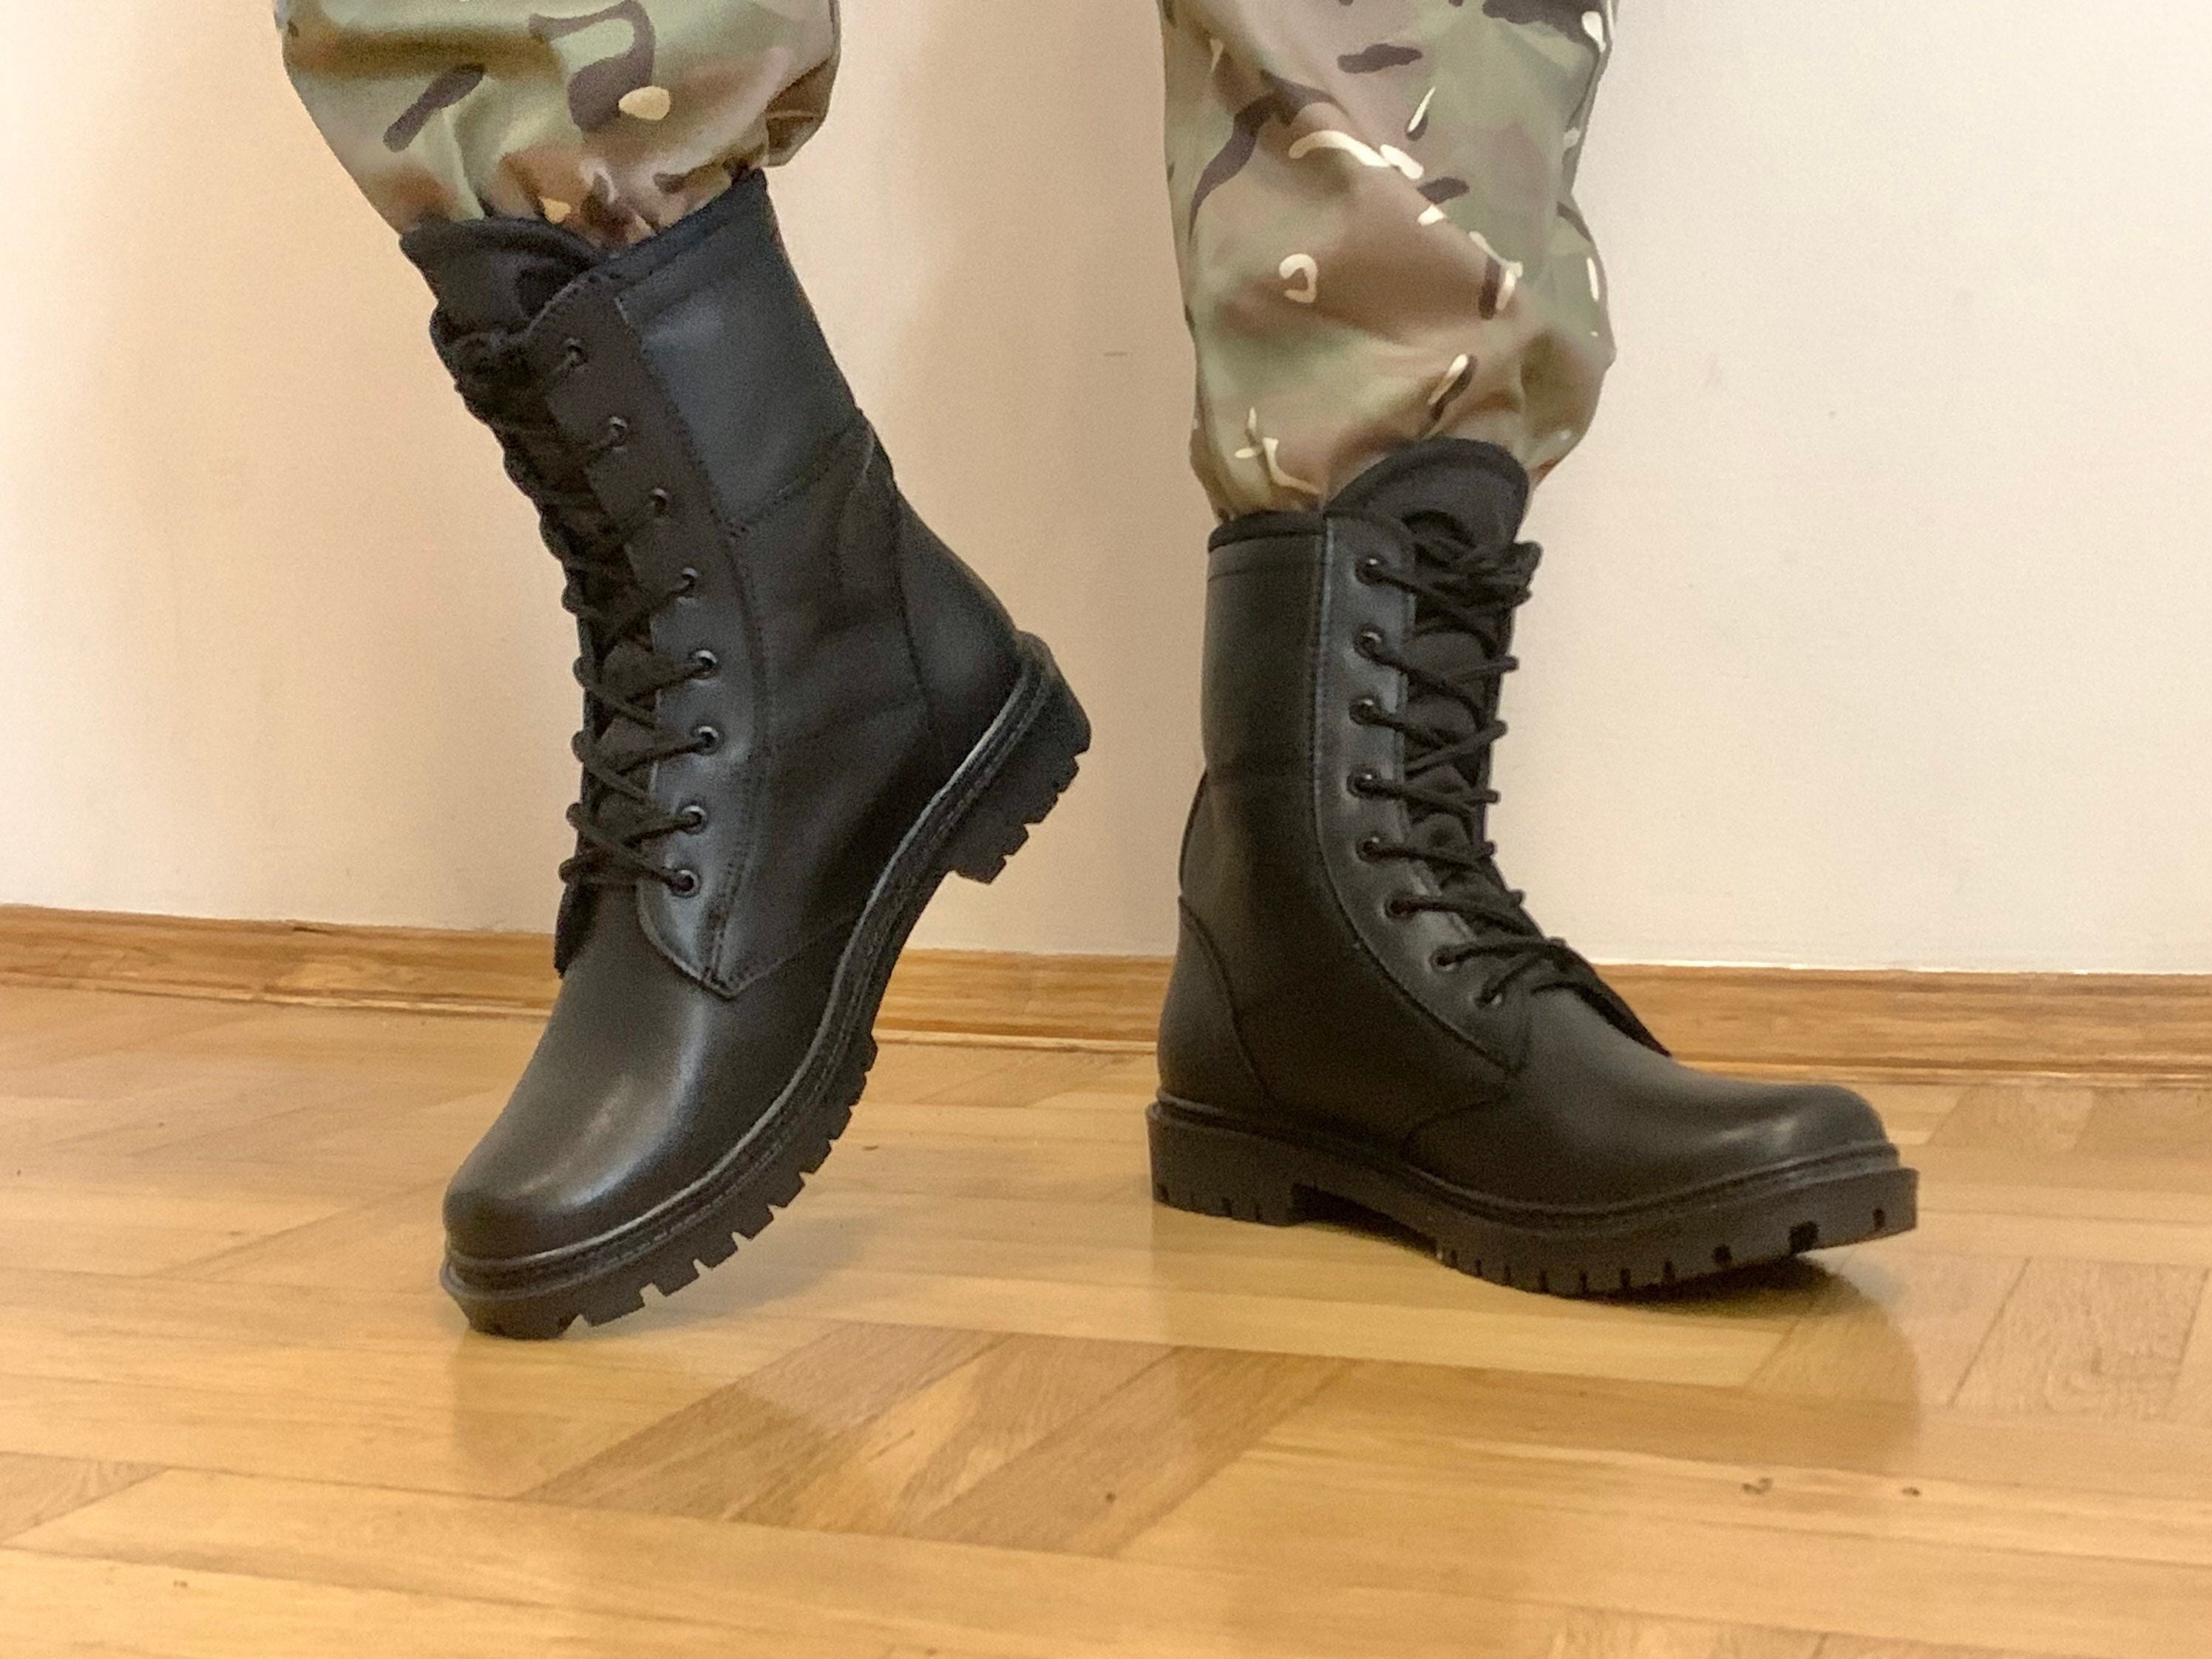 Ukrainian Leather Boots Special Forces Army Boots Military - Etsy